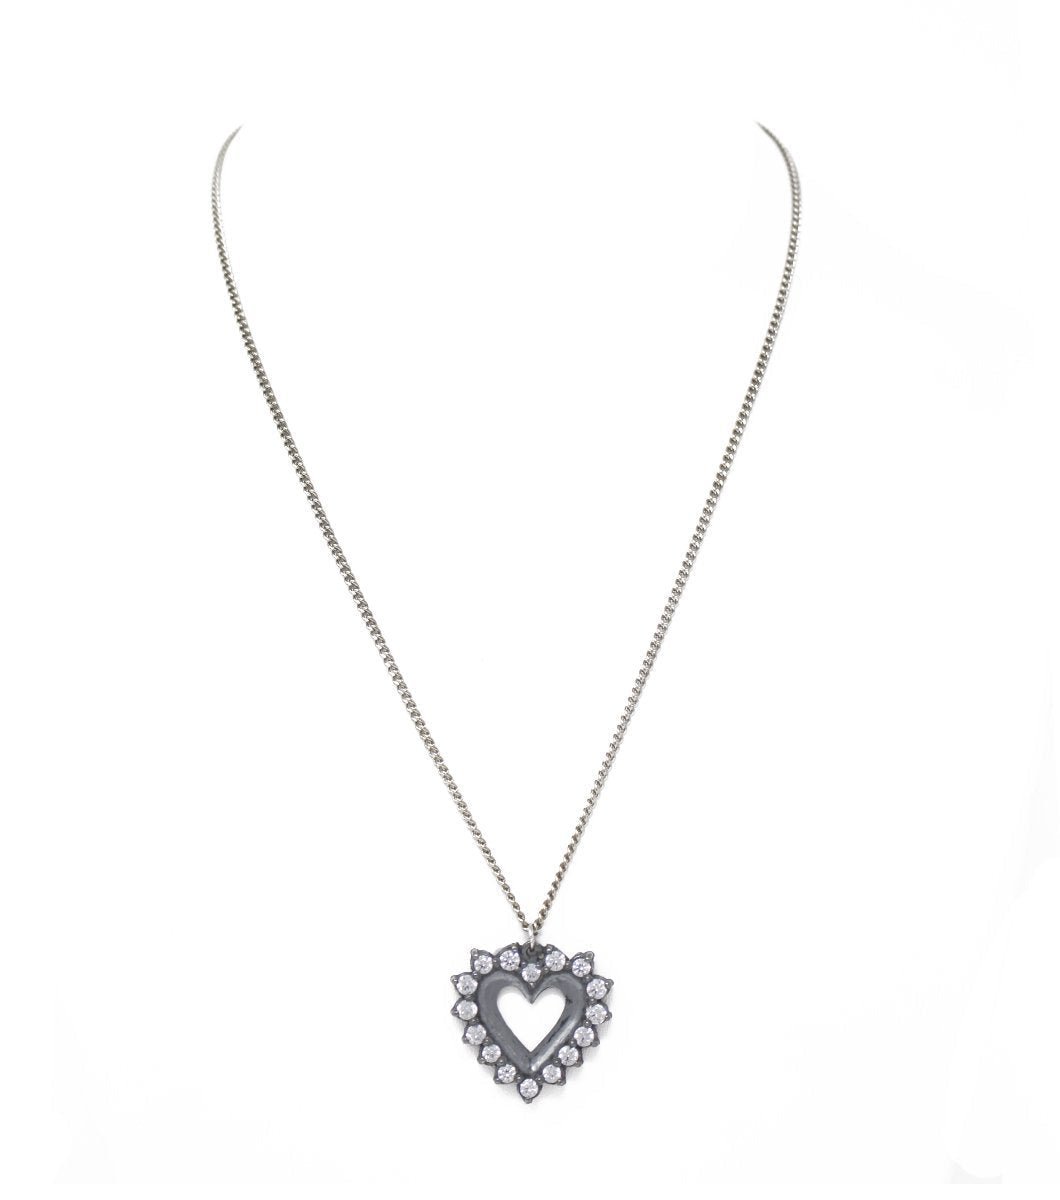 Heart Necklace With Zirconias - LAURA CANTU JEWELRY US